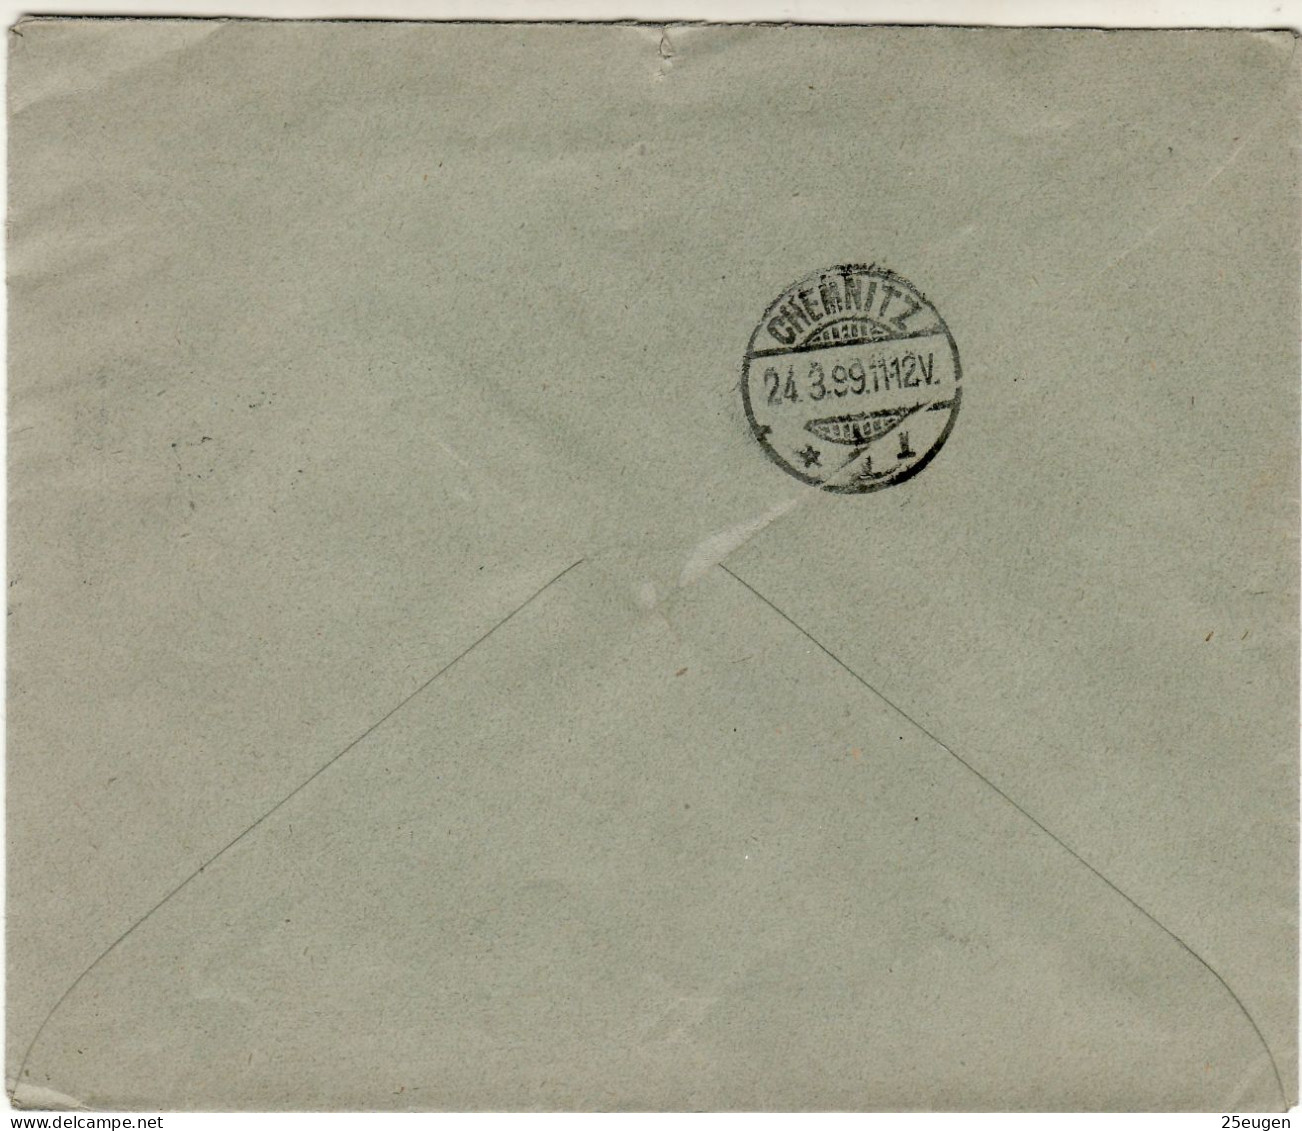 DENMARK 1899 LETTER SENT FROM FREDERICIA TO CHEMNITZ - Covers & Documents